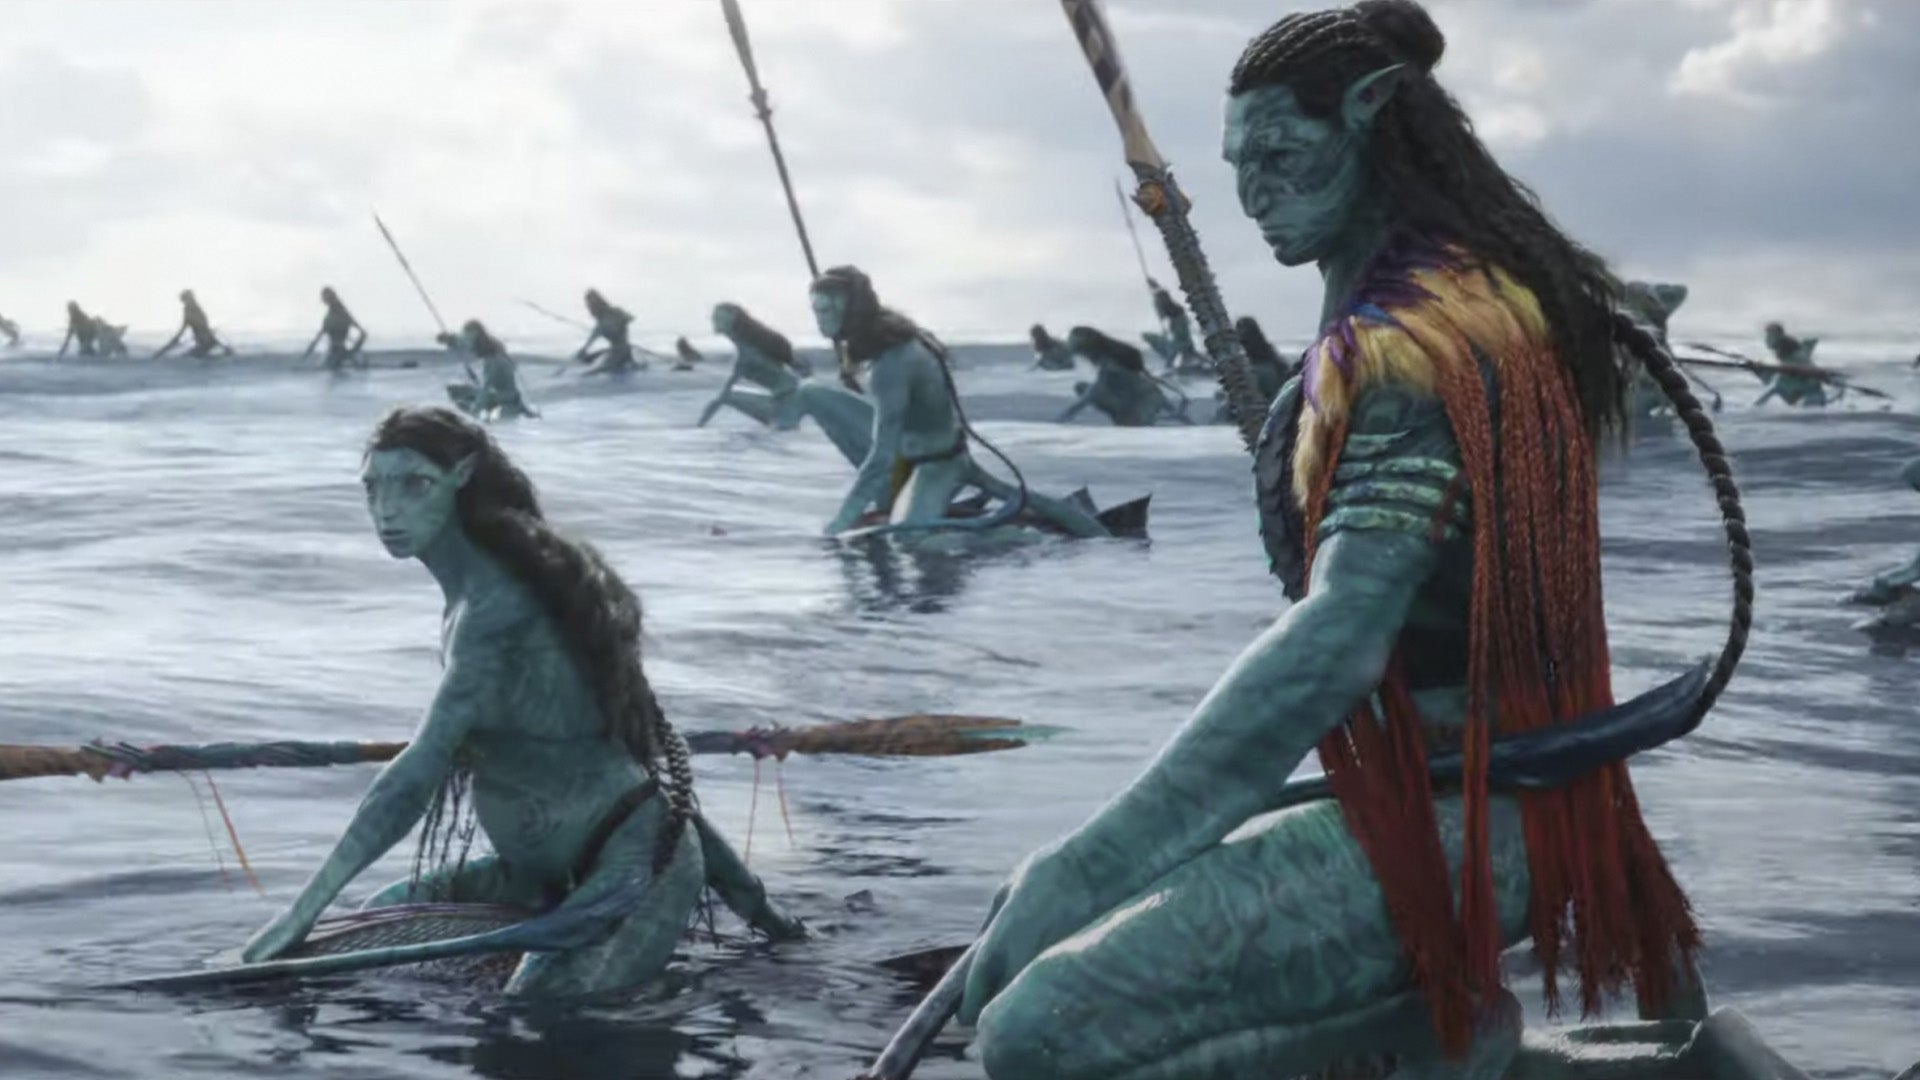 The Avatar 2 Saw More First Day Views Than Trailers For The Recent Star Wars Movies